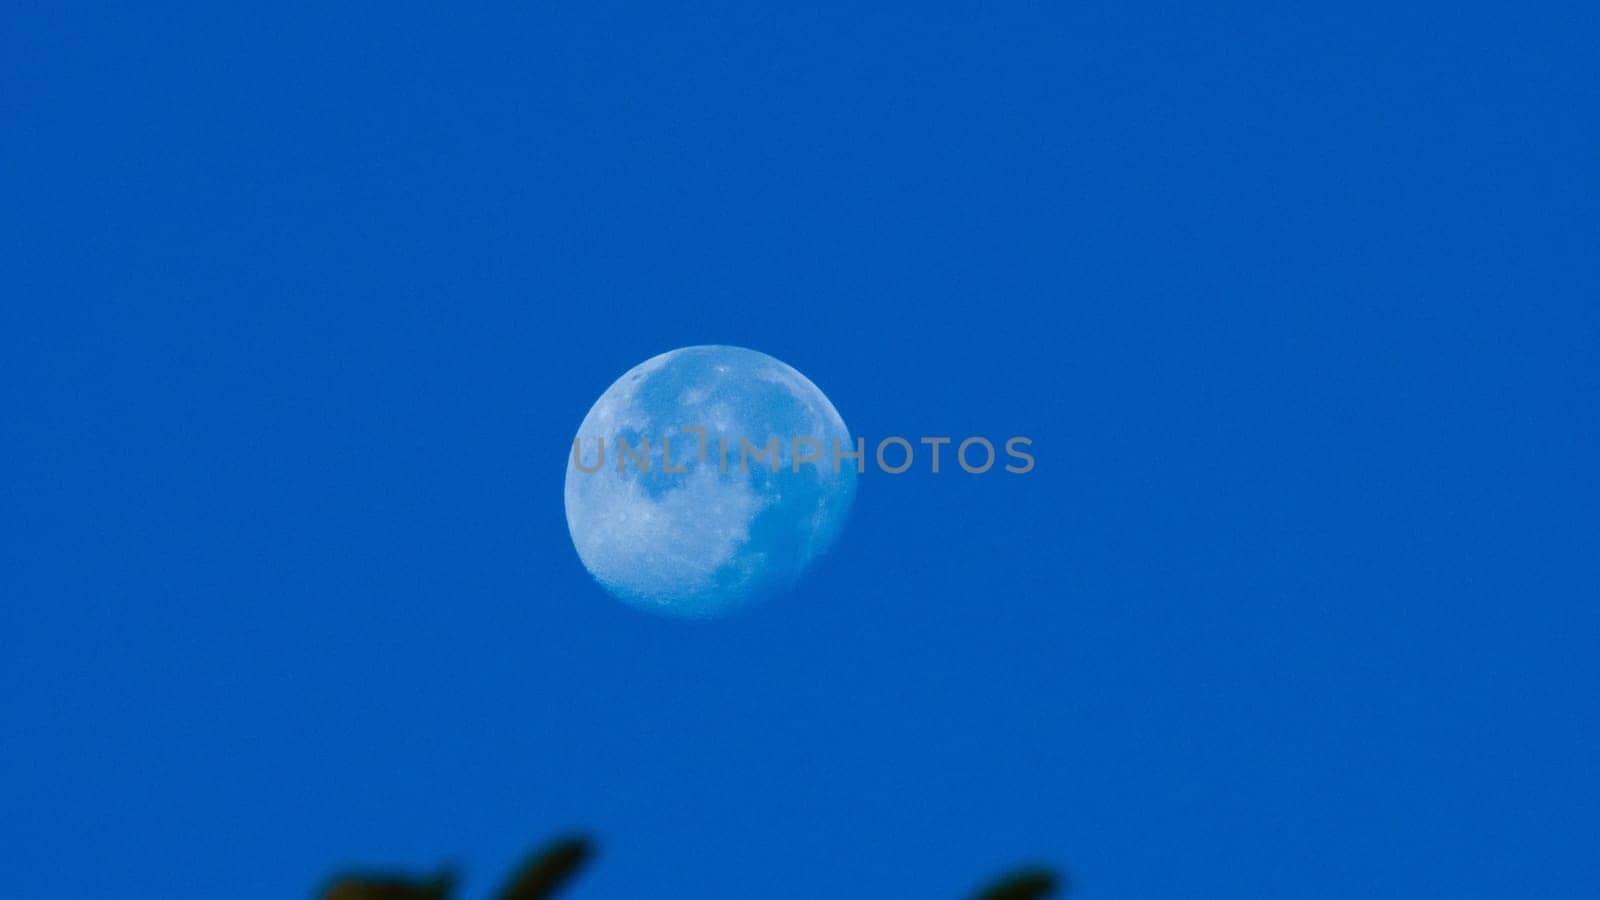 A beautiful moon was seen in the clear blue sky. Close-up of the moon in a light blue sky. by TEERASAK